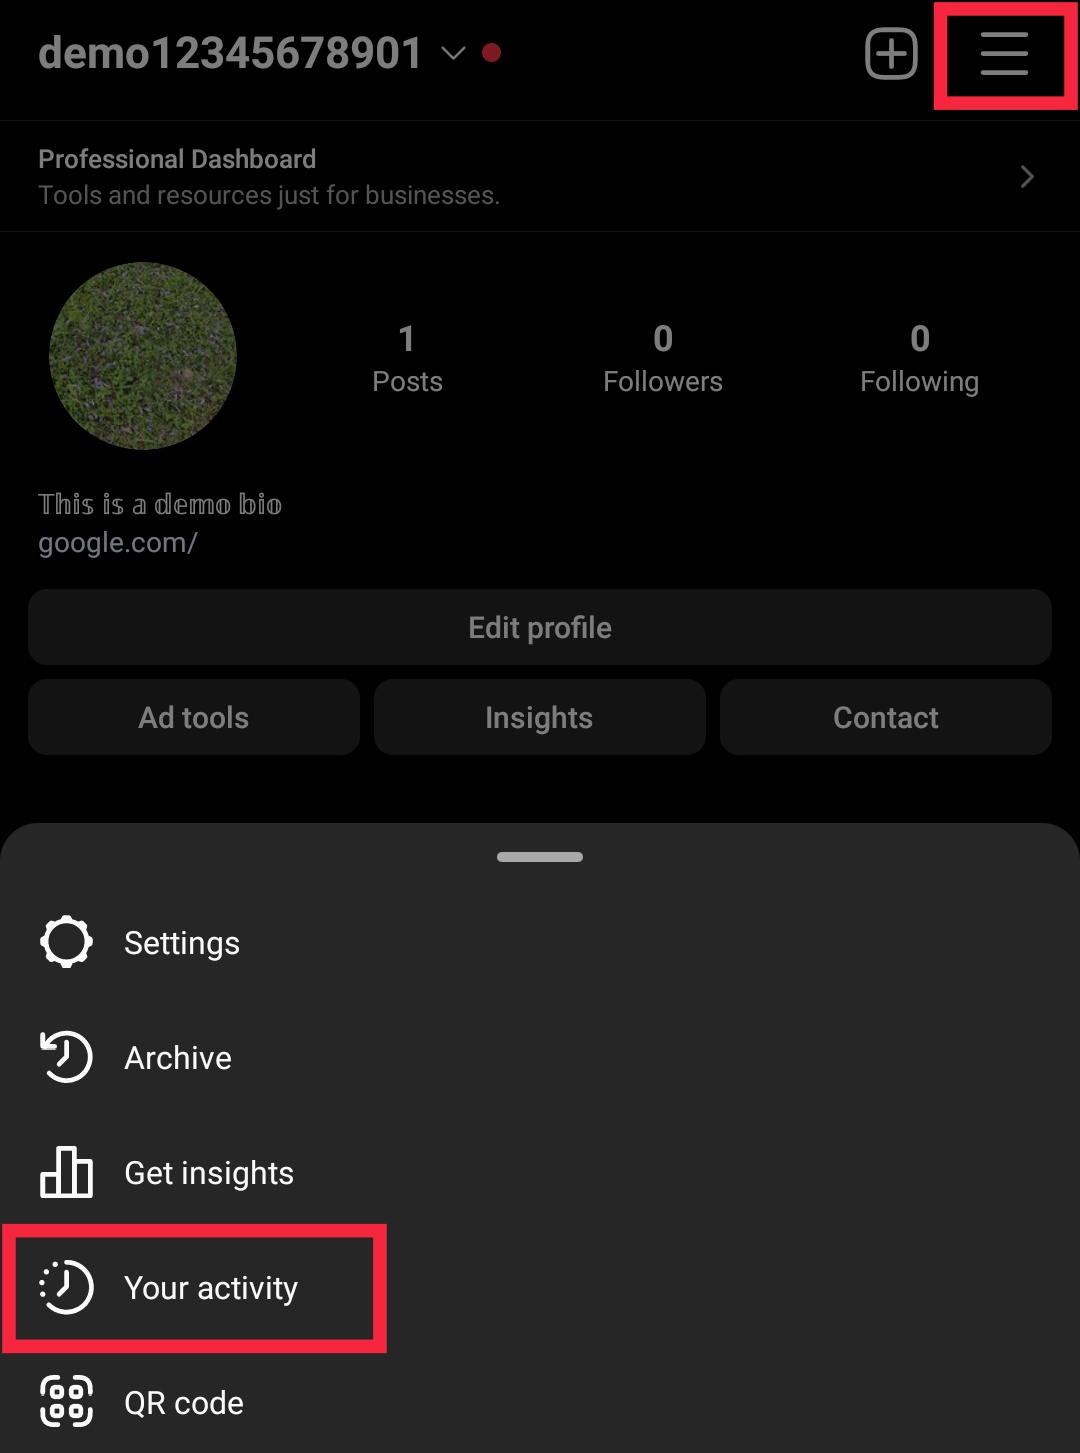 your activity option in instagram profile